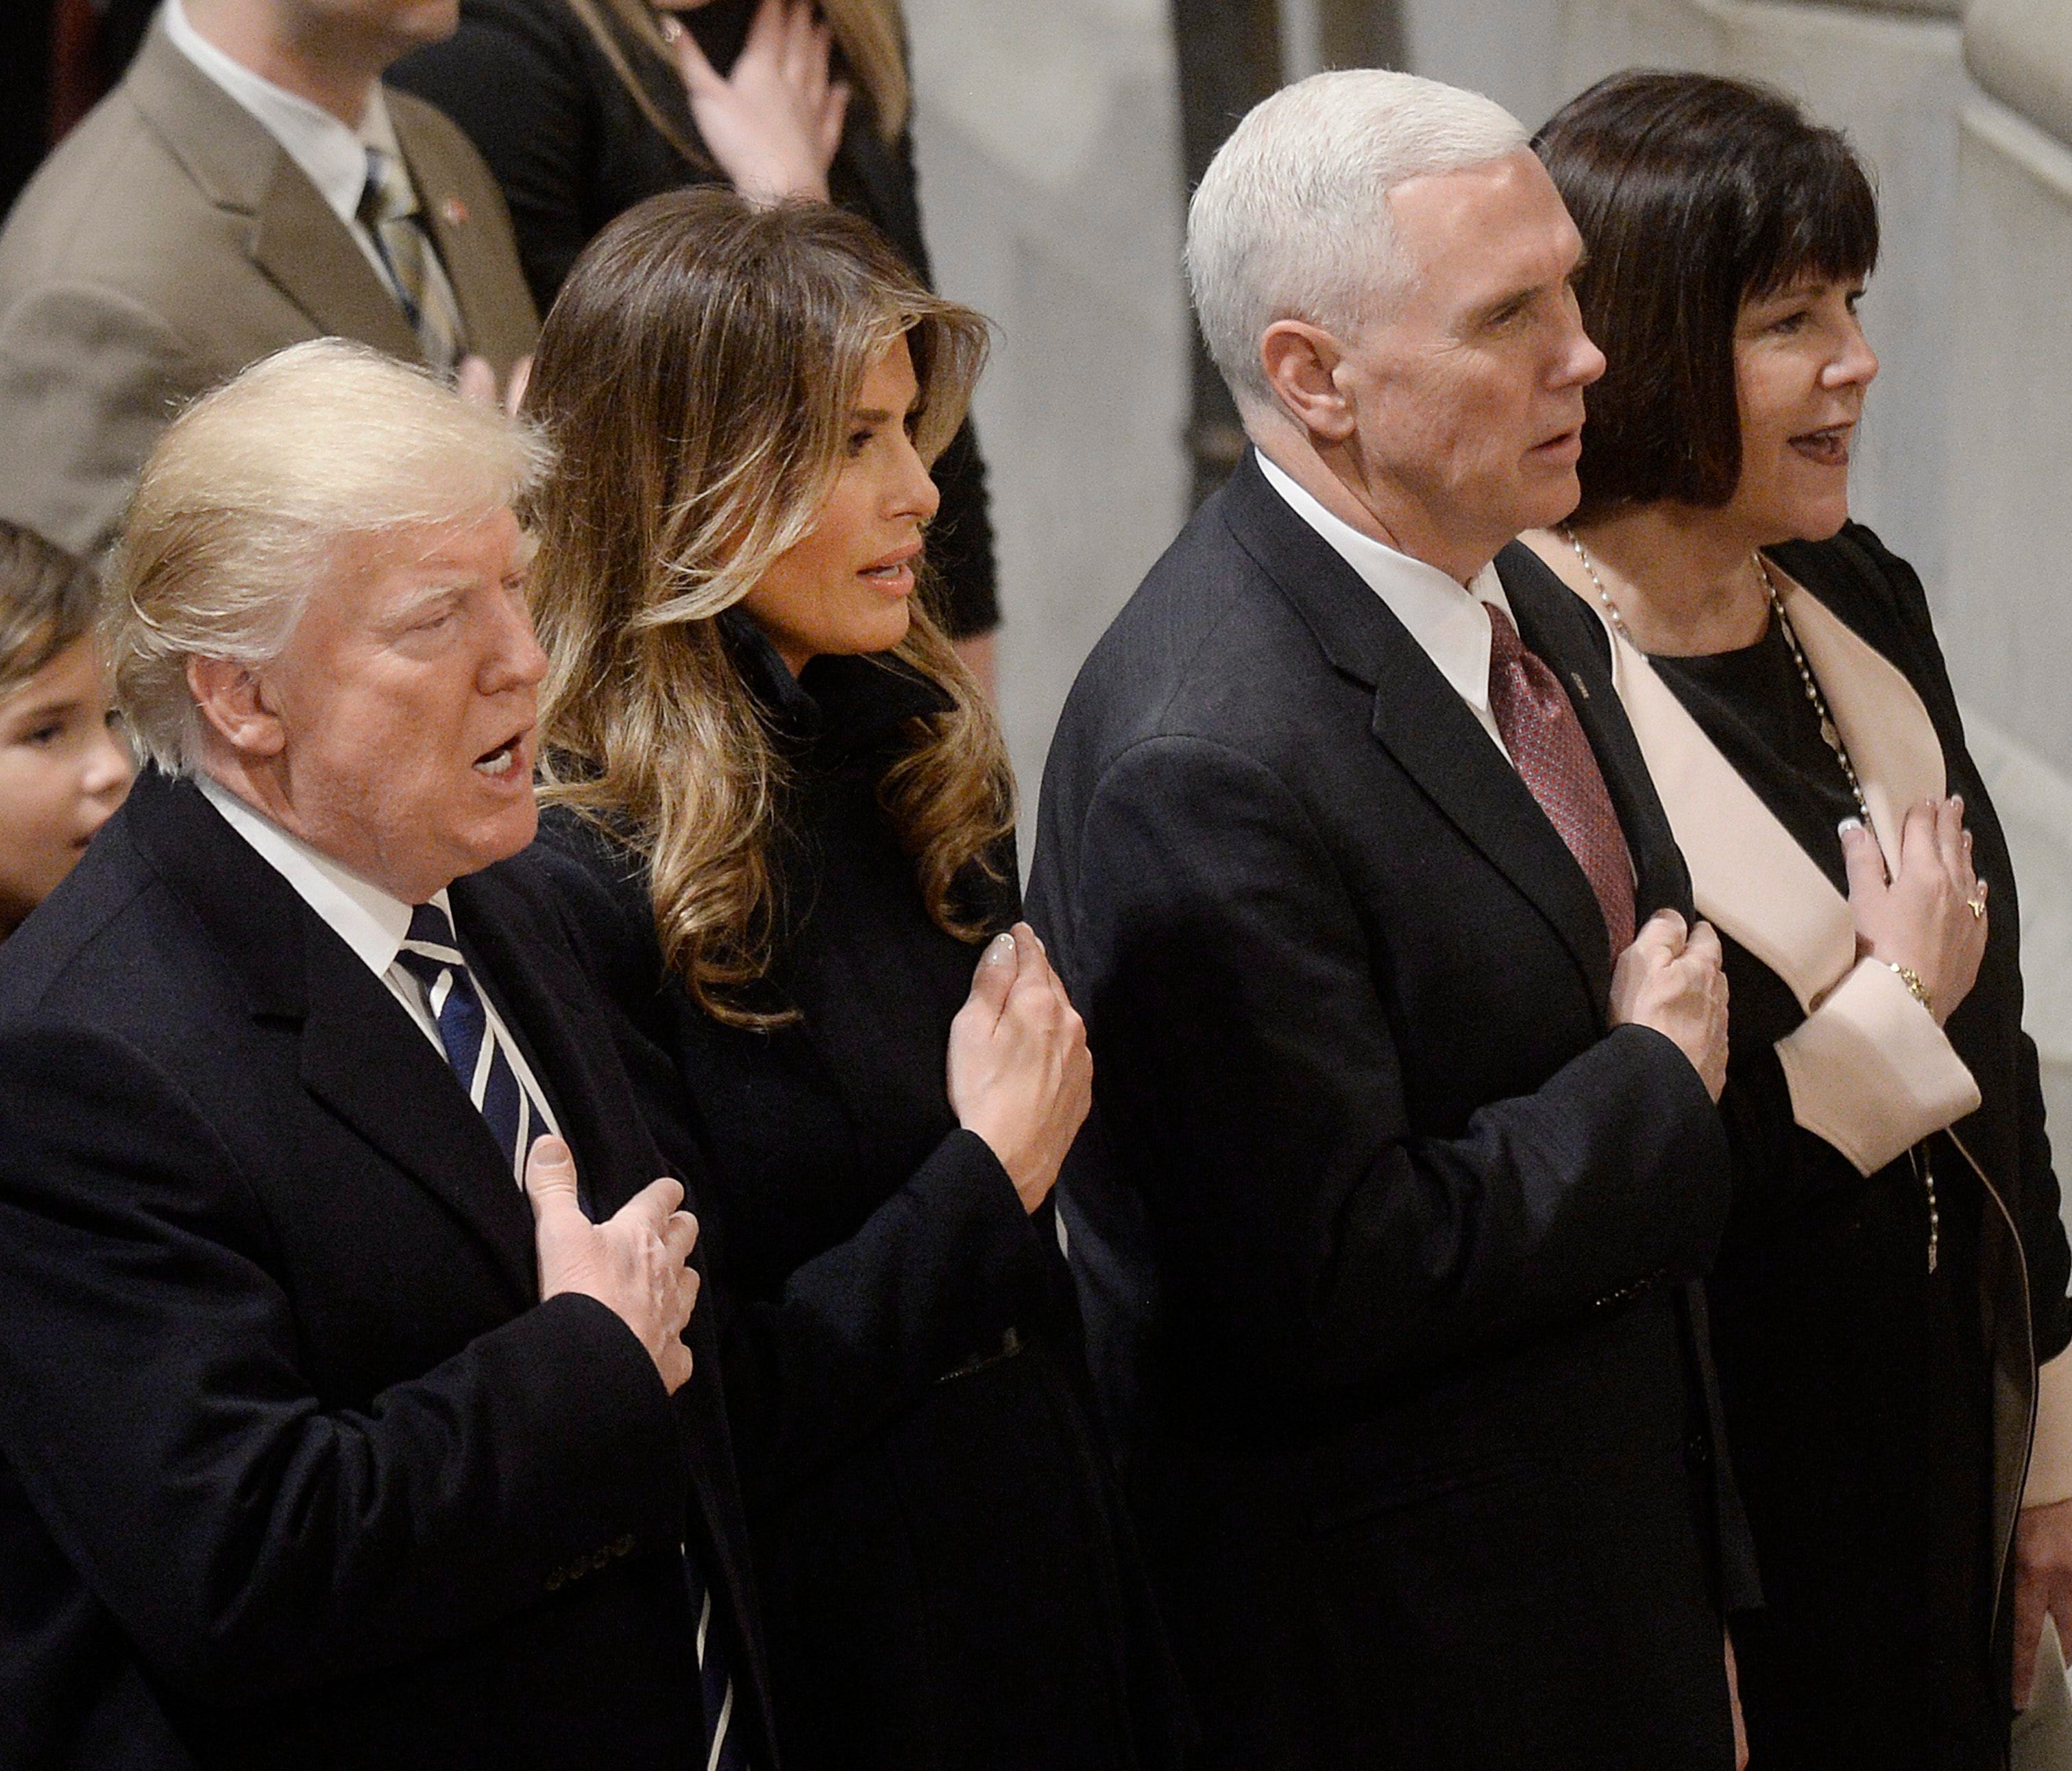 US President Donald Trump, First Lady Melania Trump, Vice President Michael Pence and his wife Karen Pence attends the National Prayer Service at the Washington National Cathedral in Washington, DC, USA, 21 January 2017.